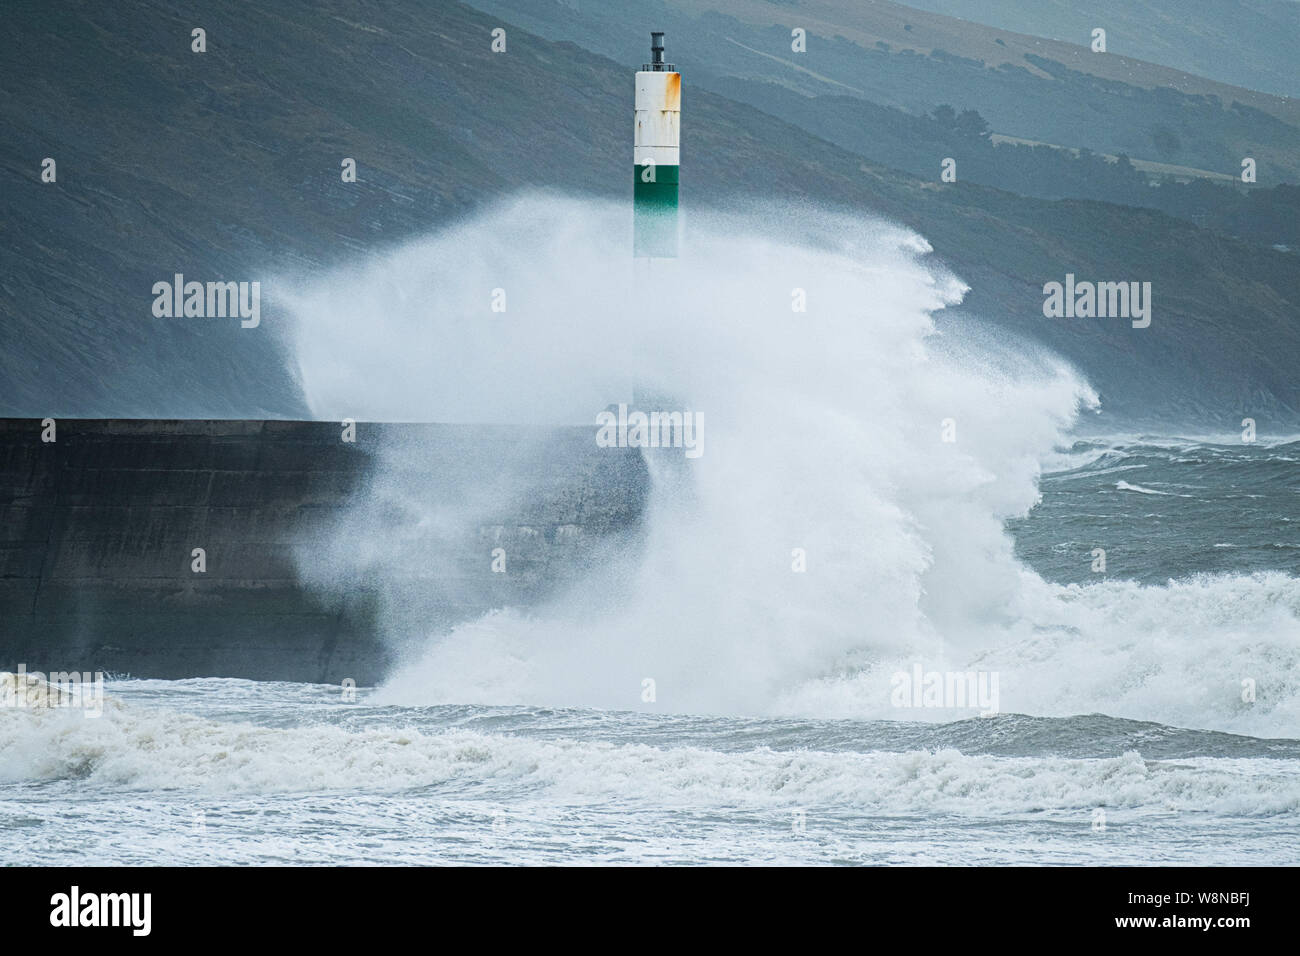 10 Aug 2019 Aberystwyth Wales UK. UK Weather: Gale force winds gusting to over 50mph and stormy seas batter the harbour lighthouse, and makes life difficult for pedestrians in Aberystwyth as unseasonably wet and windy weather sweeps across much of the west of the UK , bringing severe disruption to travel and forcing the cancellation of many outdoor events. Photo credit Keith Morris/Alamy Live News Stock Photo